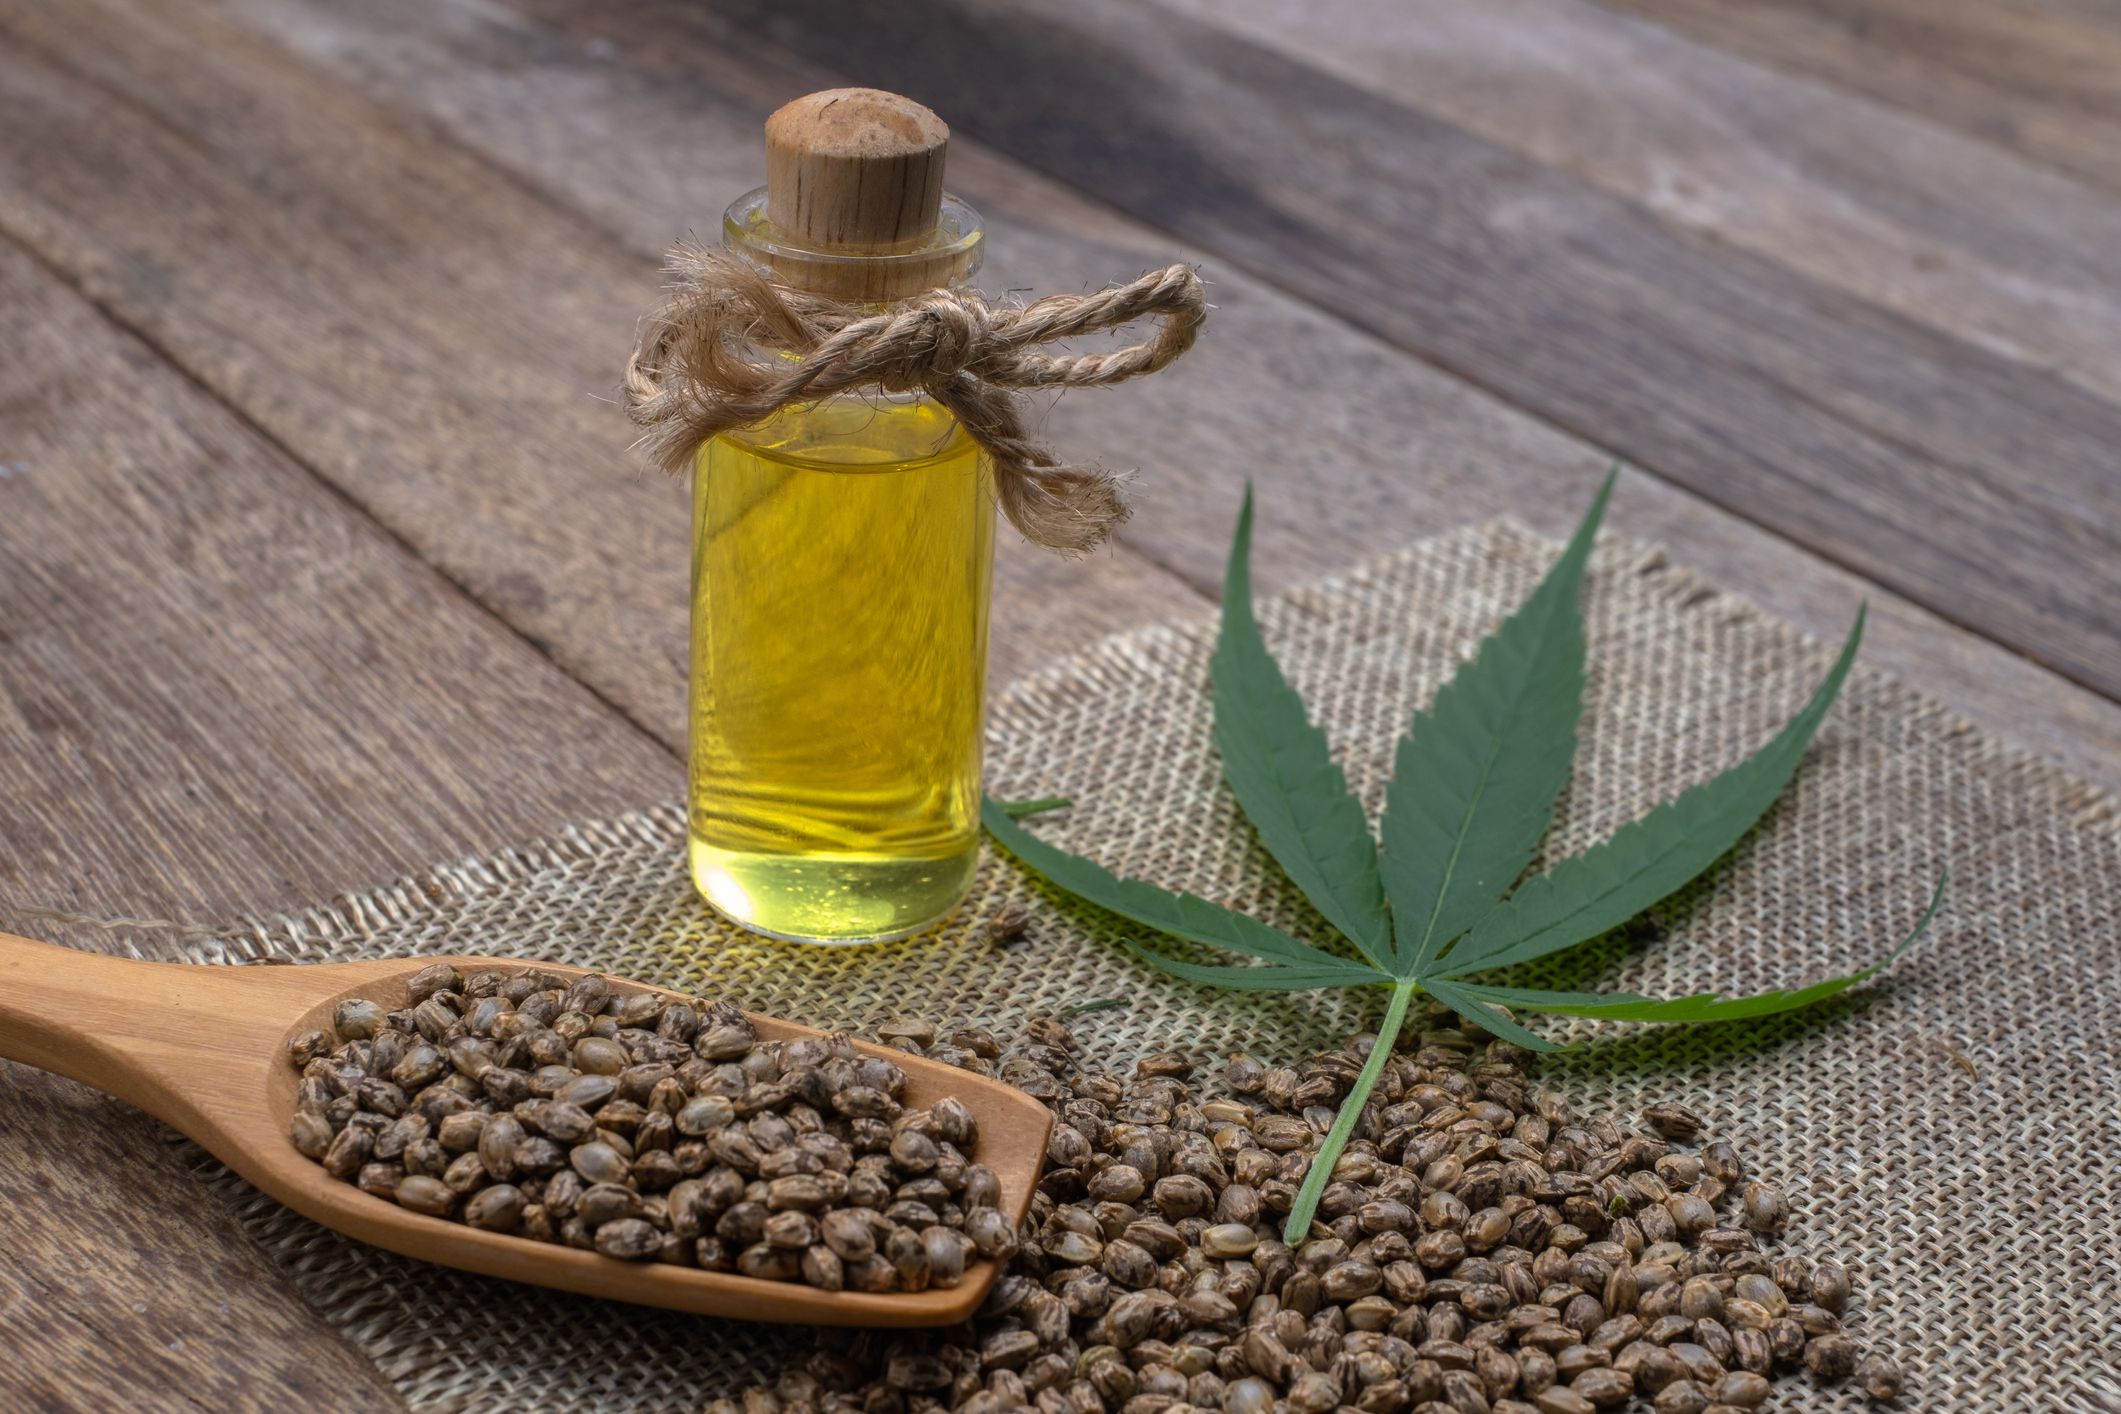 find the best CBD oils here